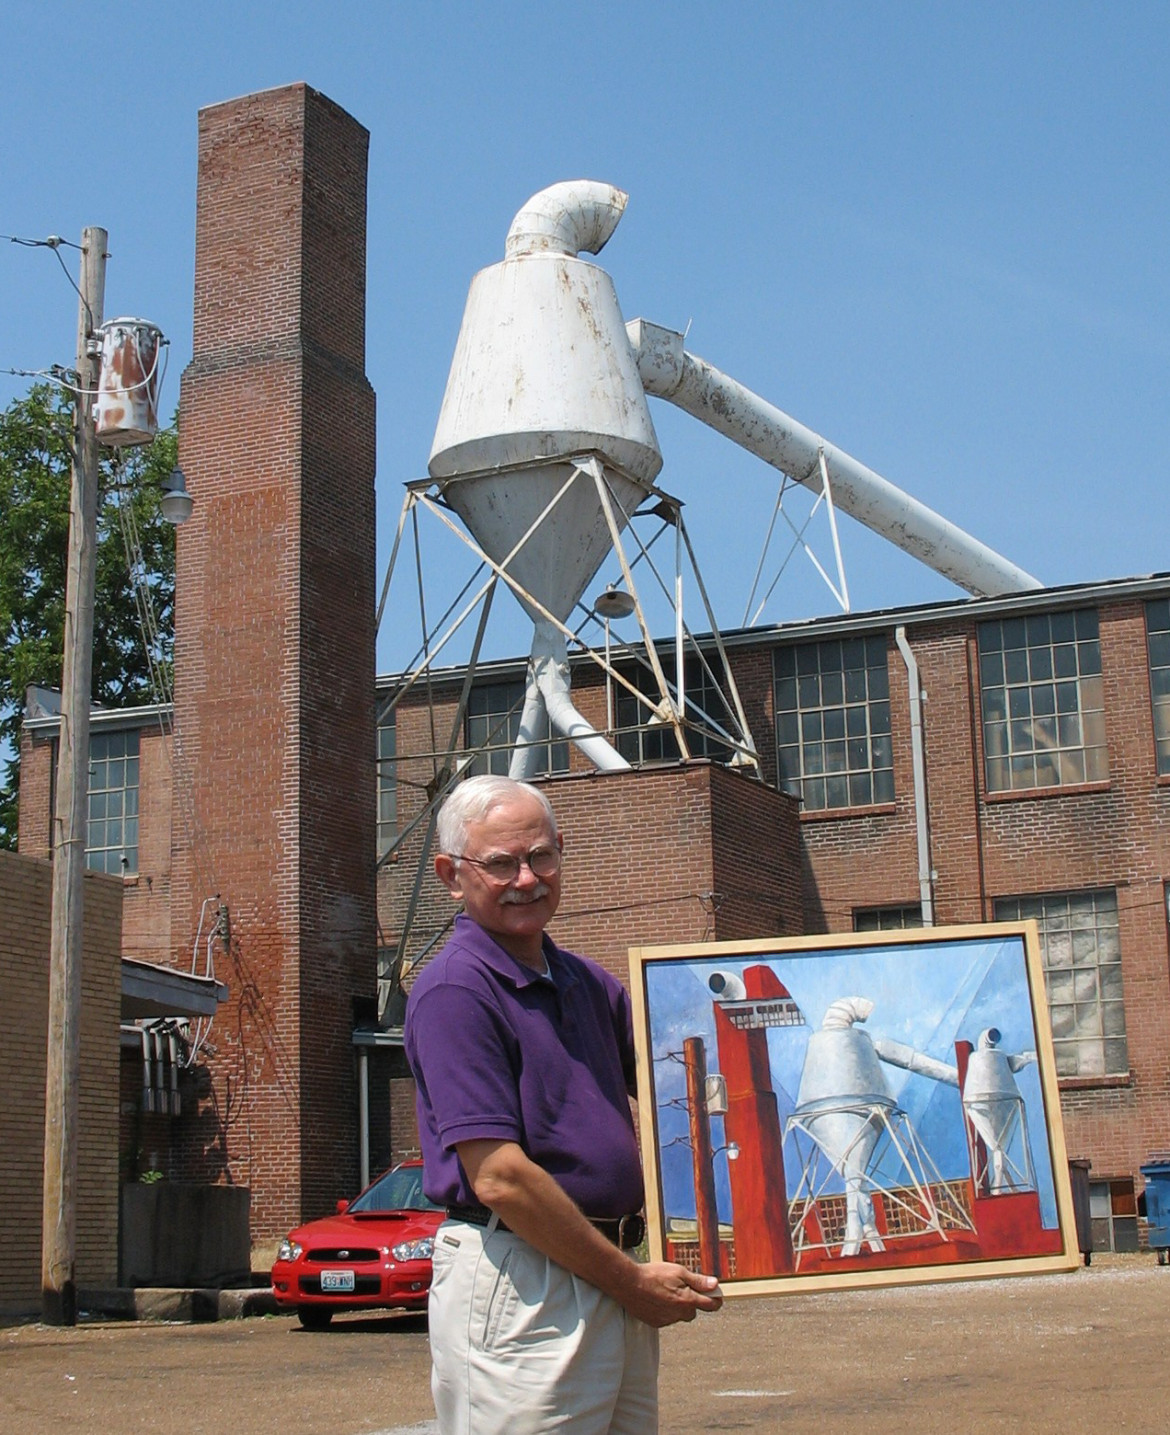 Artist Steve Turner displaying his prize winning photo of the Maplewood Cyclone in front of the same.